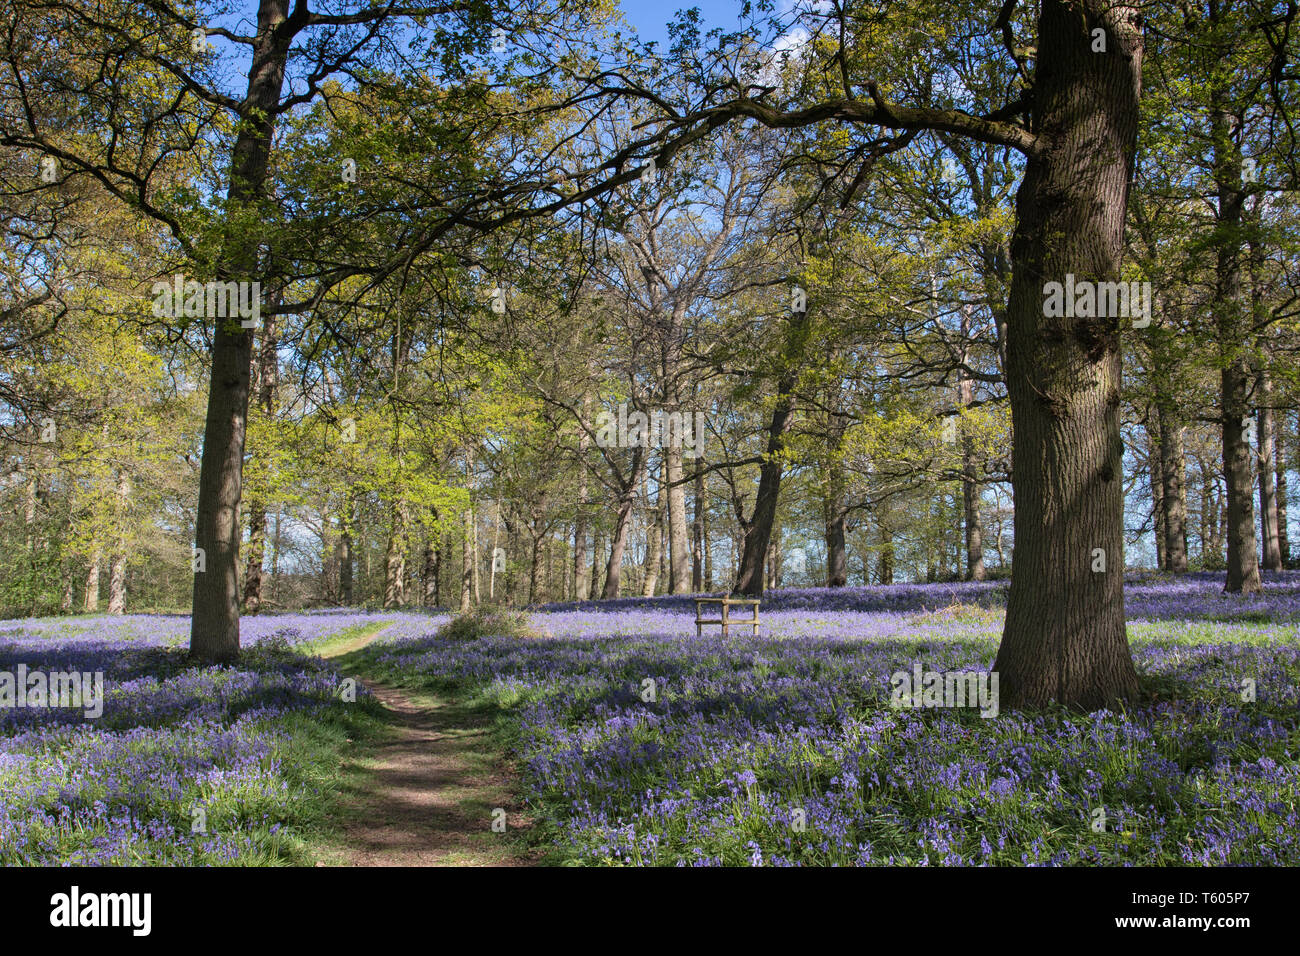 Carpets of Bluebells in springtime Stock Photo